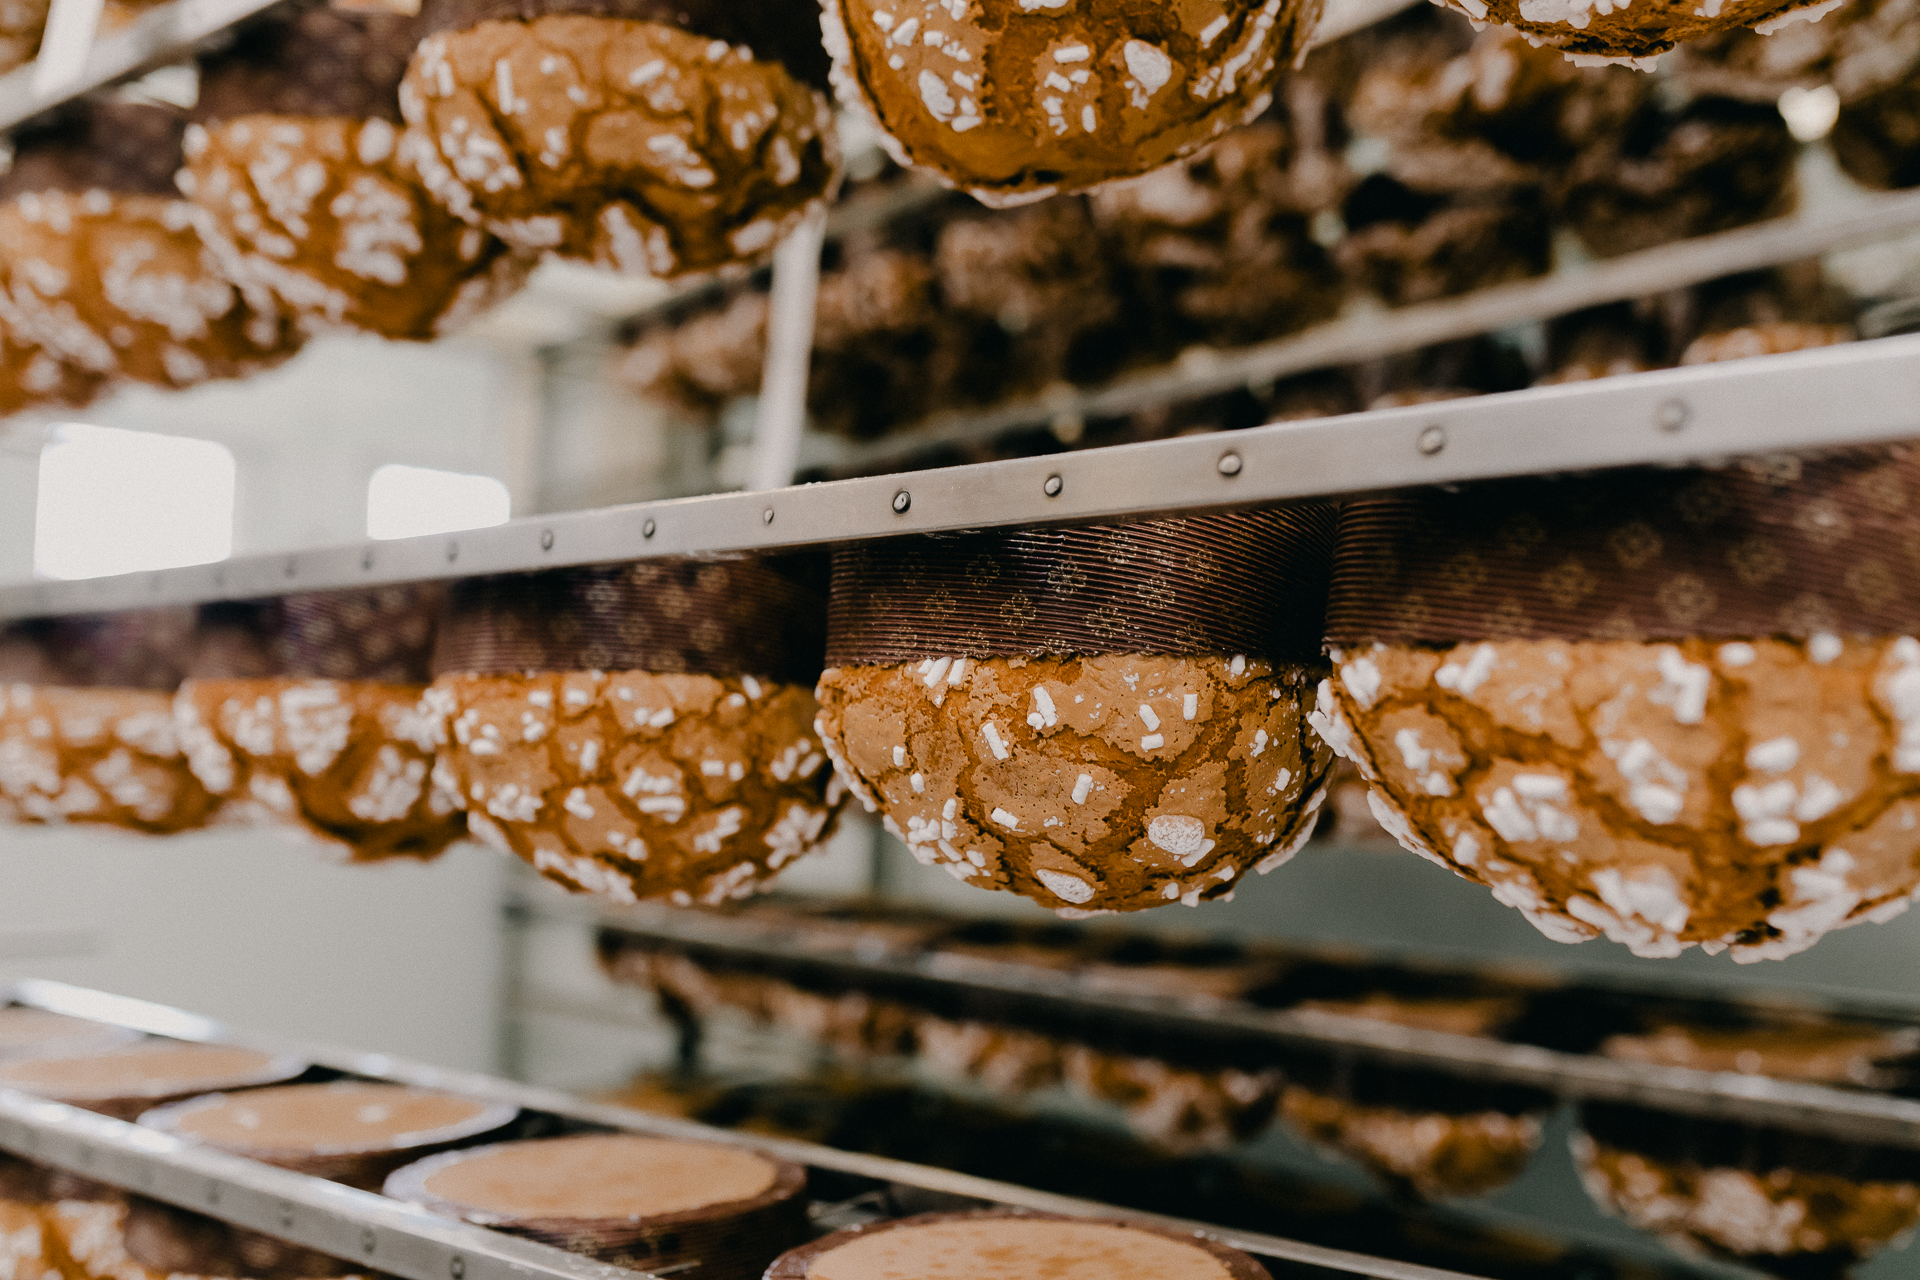 Giotto Bakery – Rows of bakes resting upside down on industrial shelving.